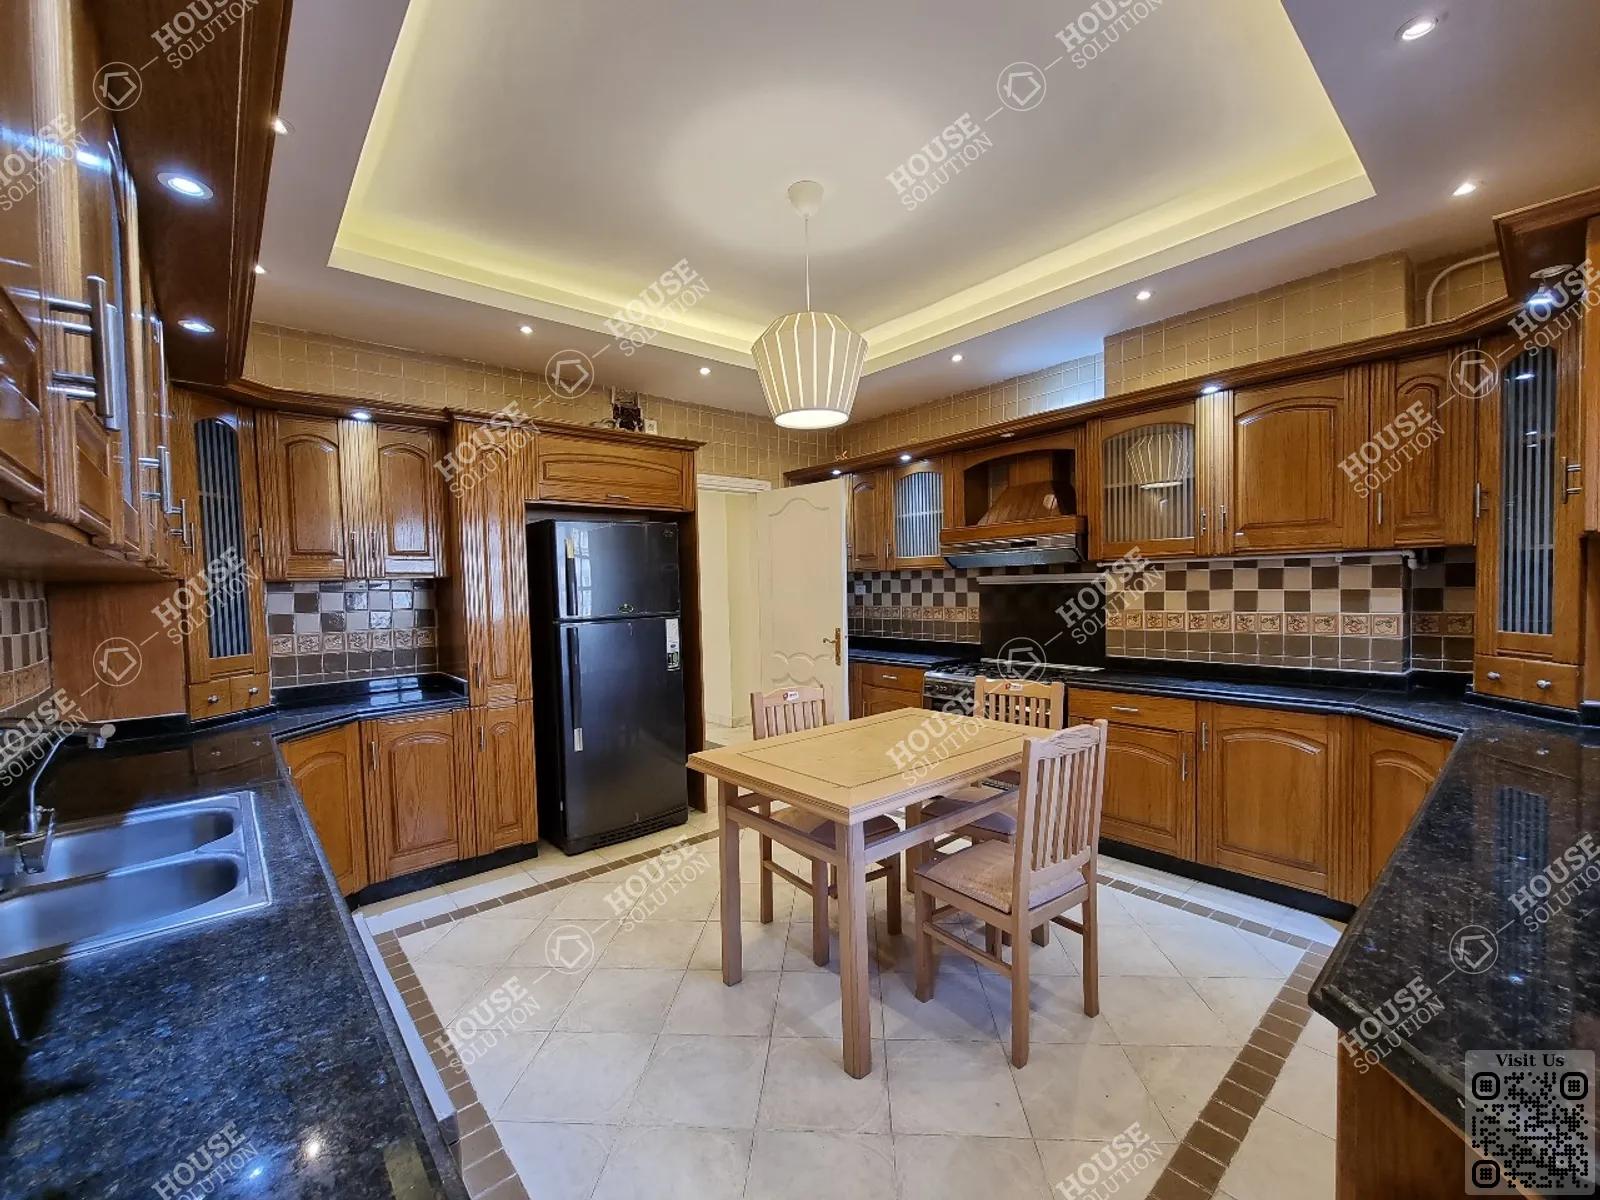 KITCHEN  @ Apartments For Rent In Maadi Maadi Sarayat Area: 250 m² consists of 4 Bedrooms 3 Bathrooms Modern furnished 5 stars #5922-1